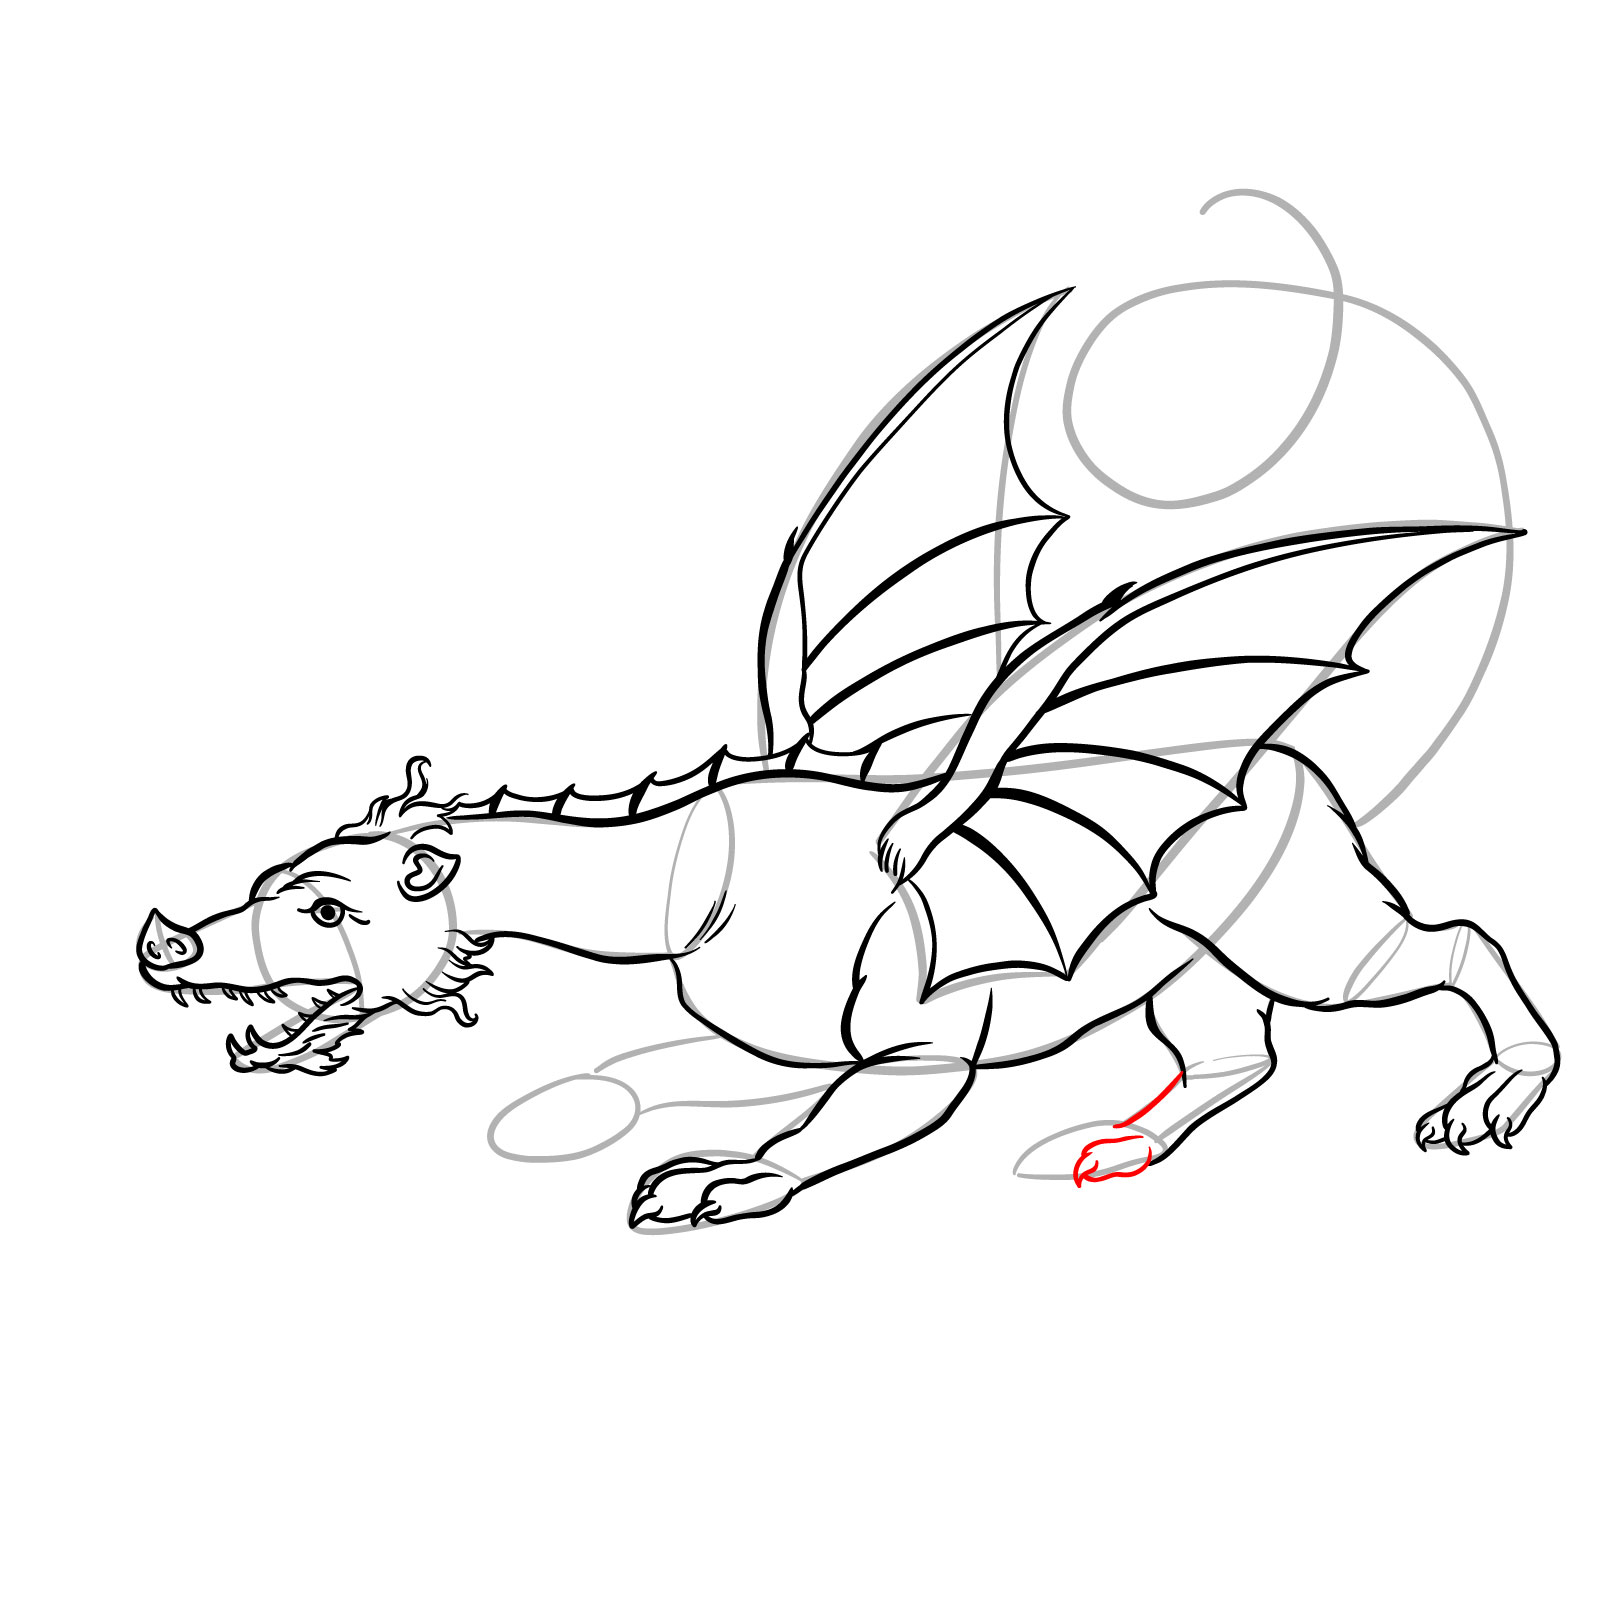 How to draw a classic European dragon - step 35